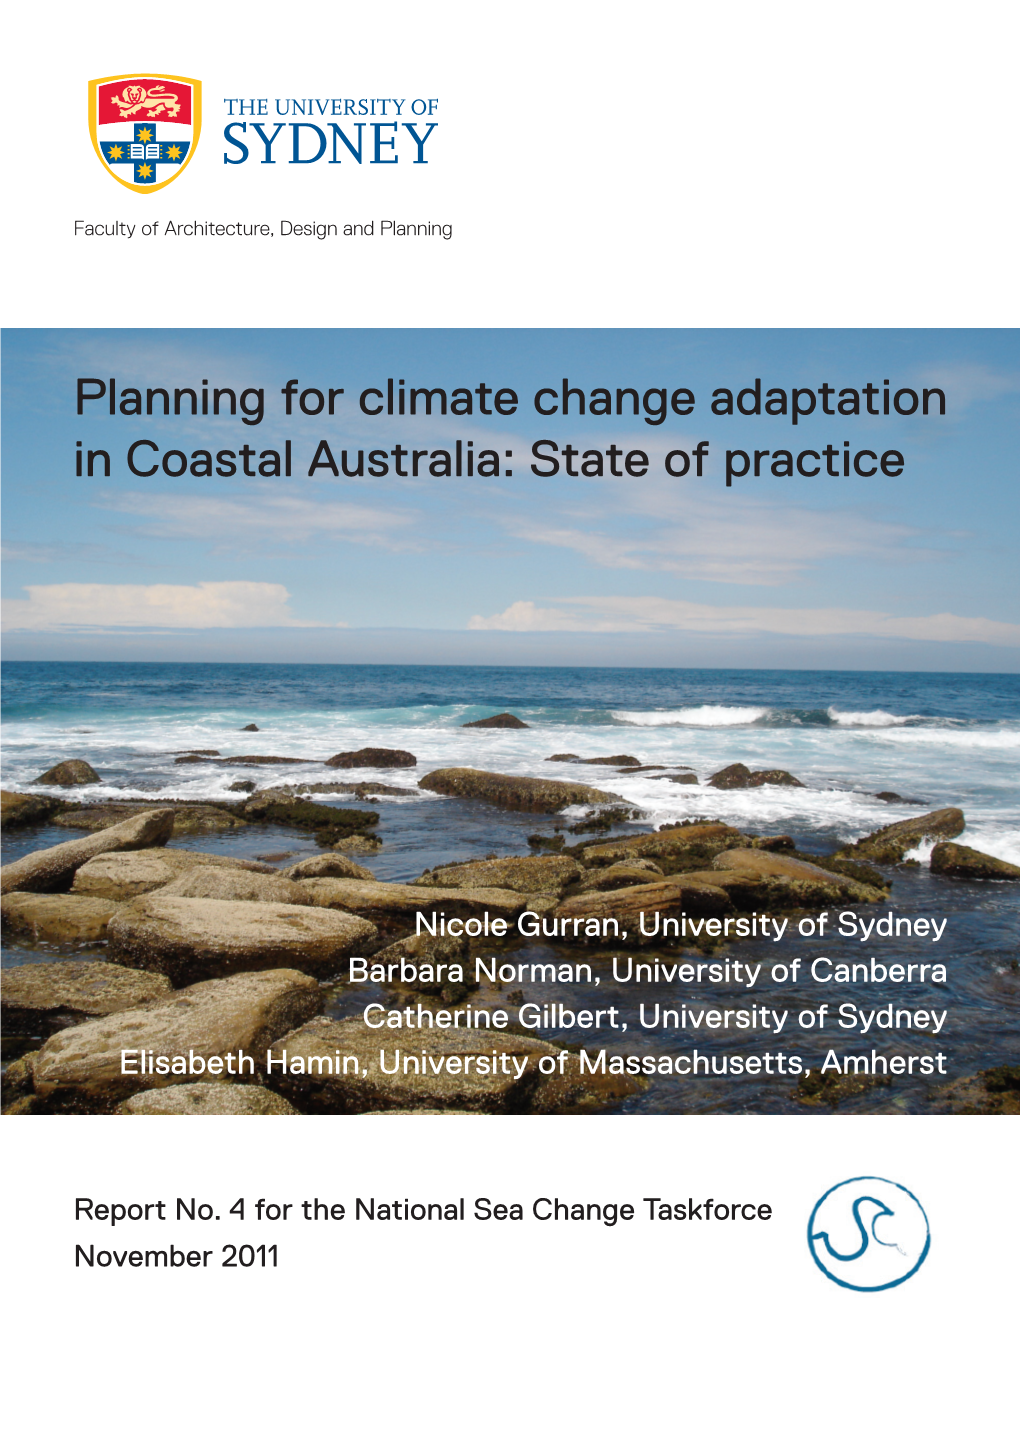 Planning for Climate Change Adaptation in Coastal Australia: State of Practice